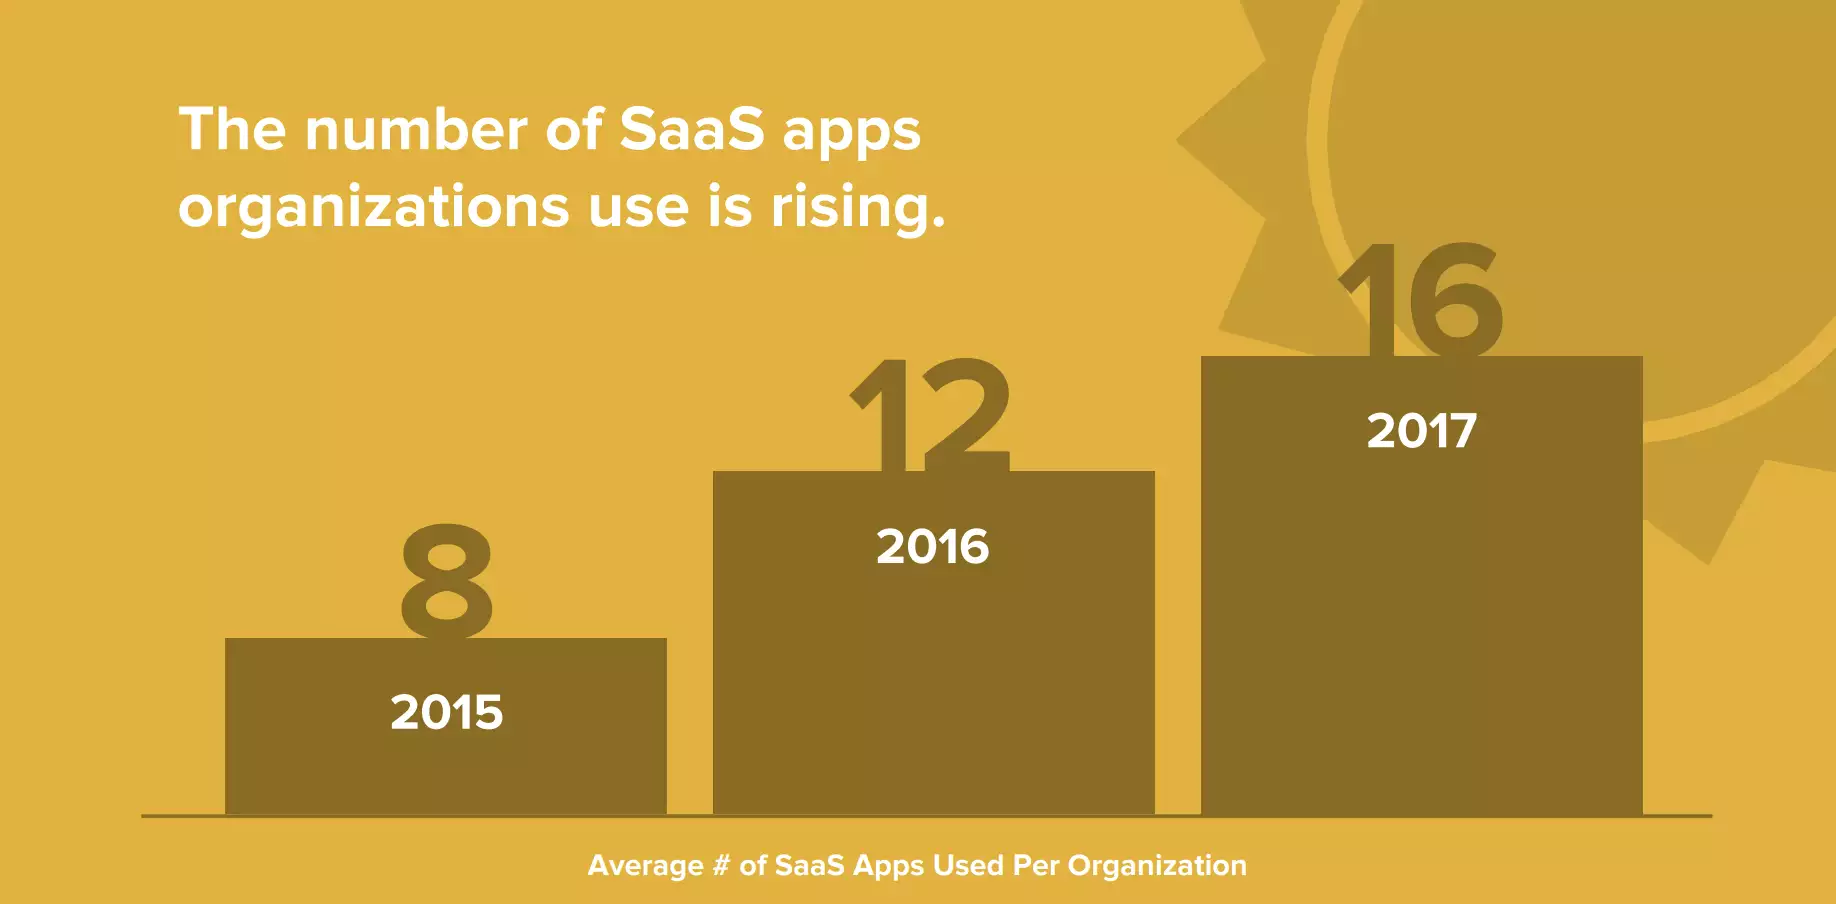 What Is A SaaS Platform? The Benefits Of The Saas Platform Model For Vietnamese Businesses